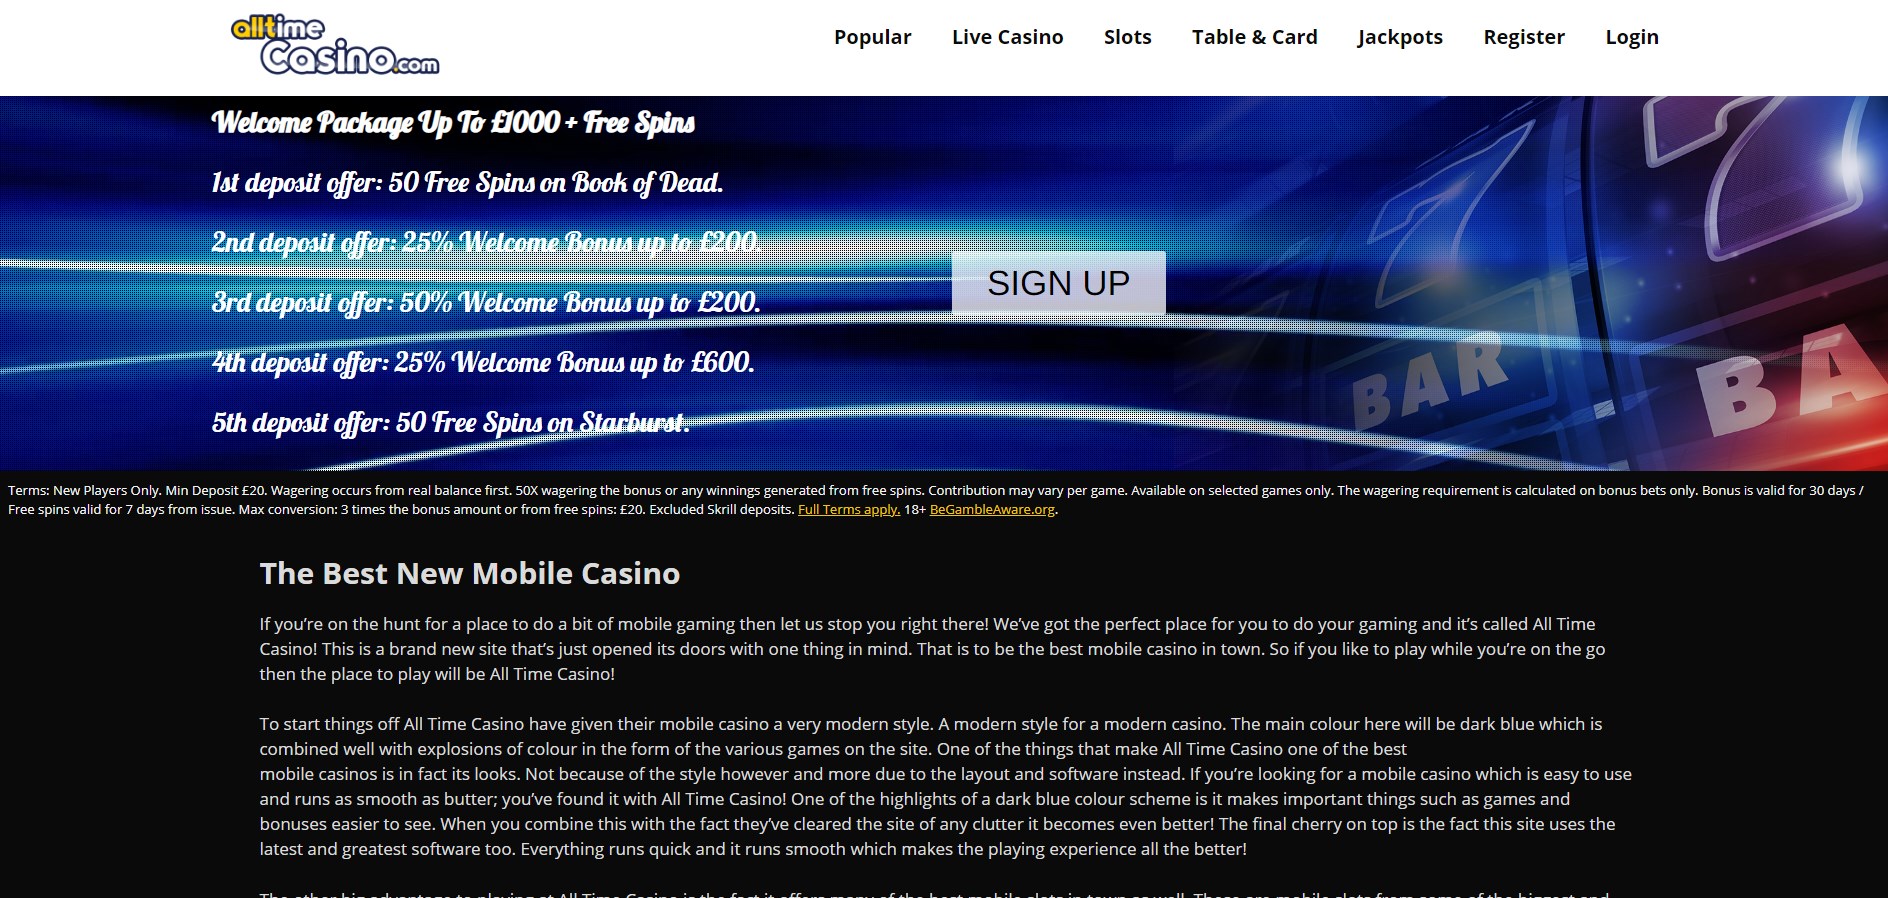 All Time Casino Review